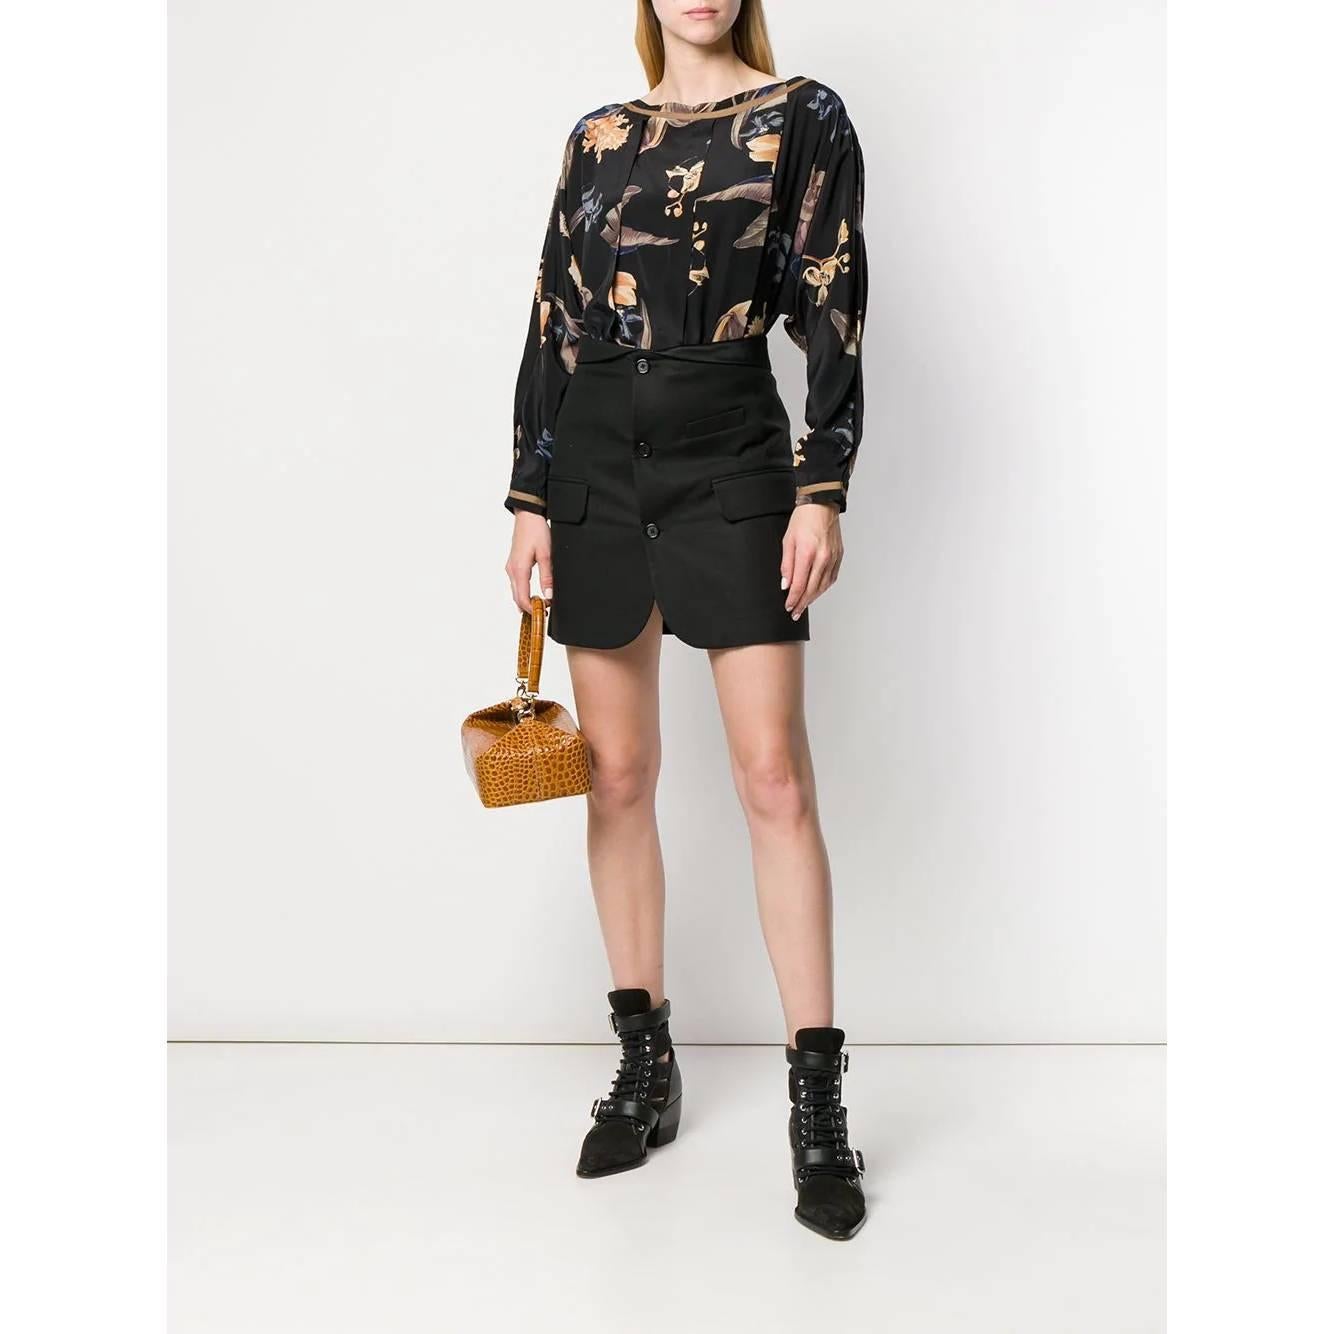 Versace black silk blouse with multicolor floral print. Pleated model, crewneck and long batwing sleeves.

Size: 44 IT

Flat measurements
Height: 70 cm
Shoulders: 40 cm
Sleeves: 63 cm

Product code: A5758

Composition: Silk

Made in: